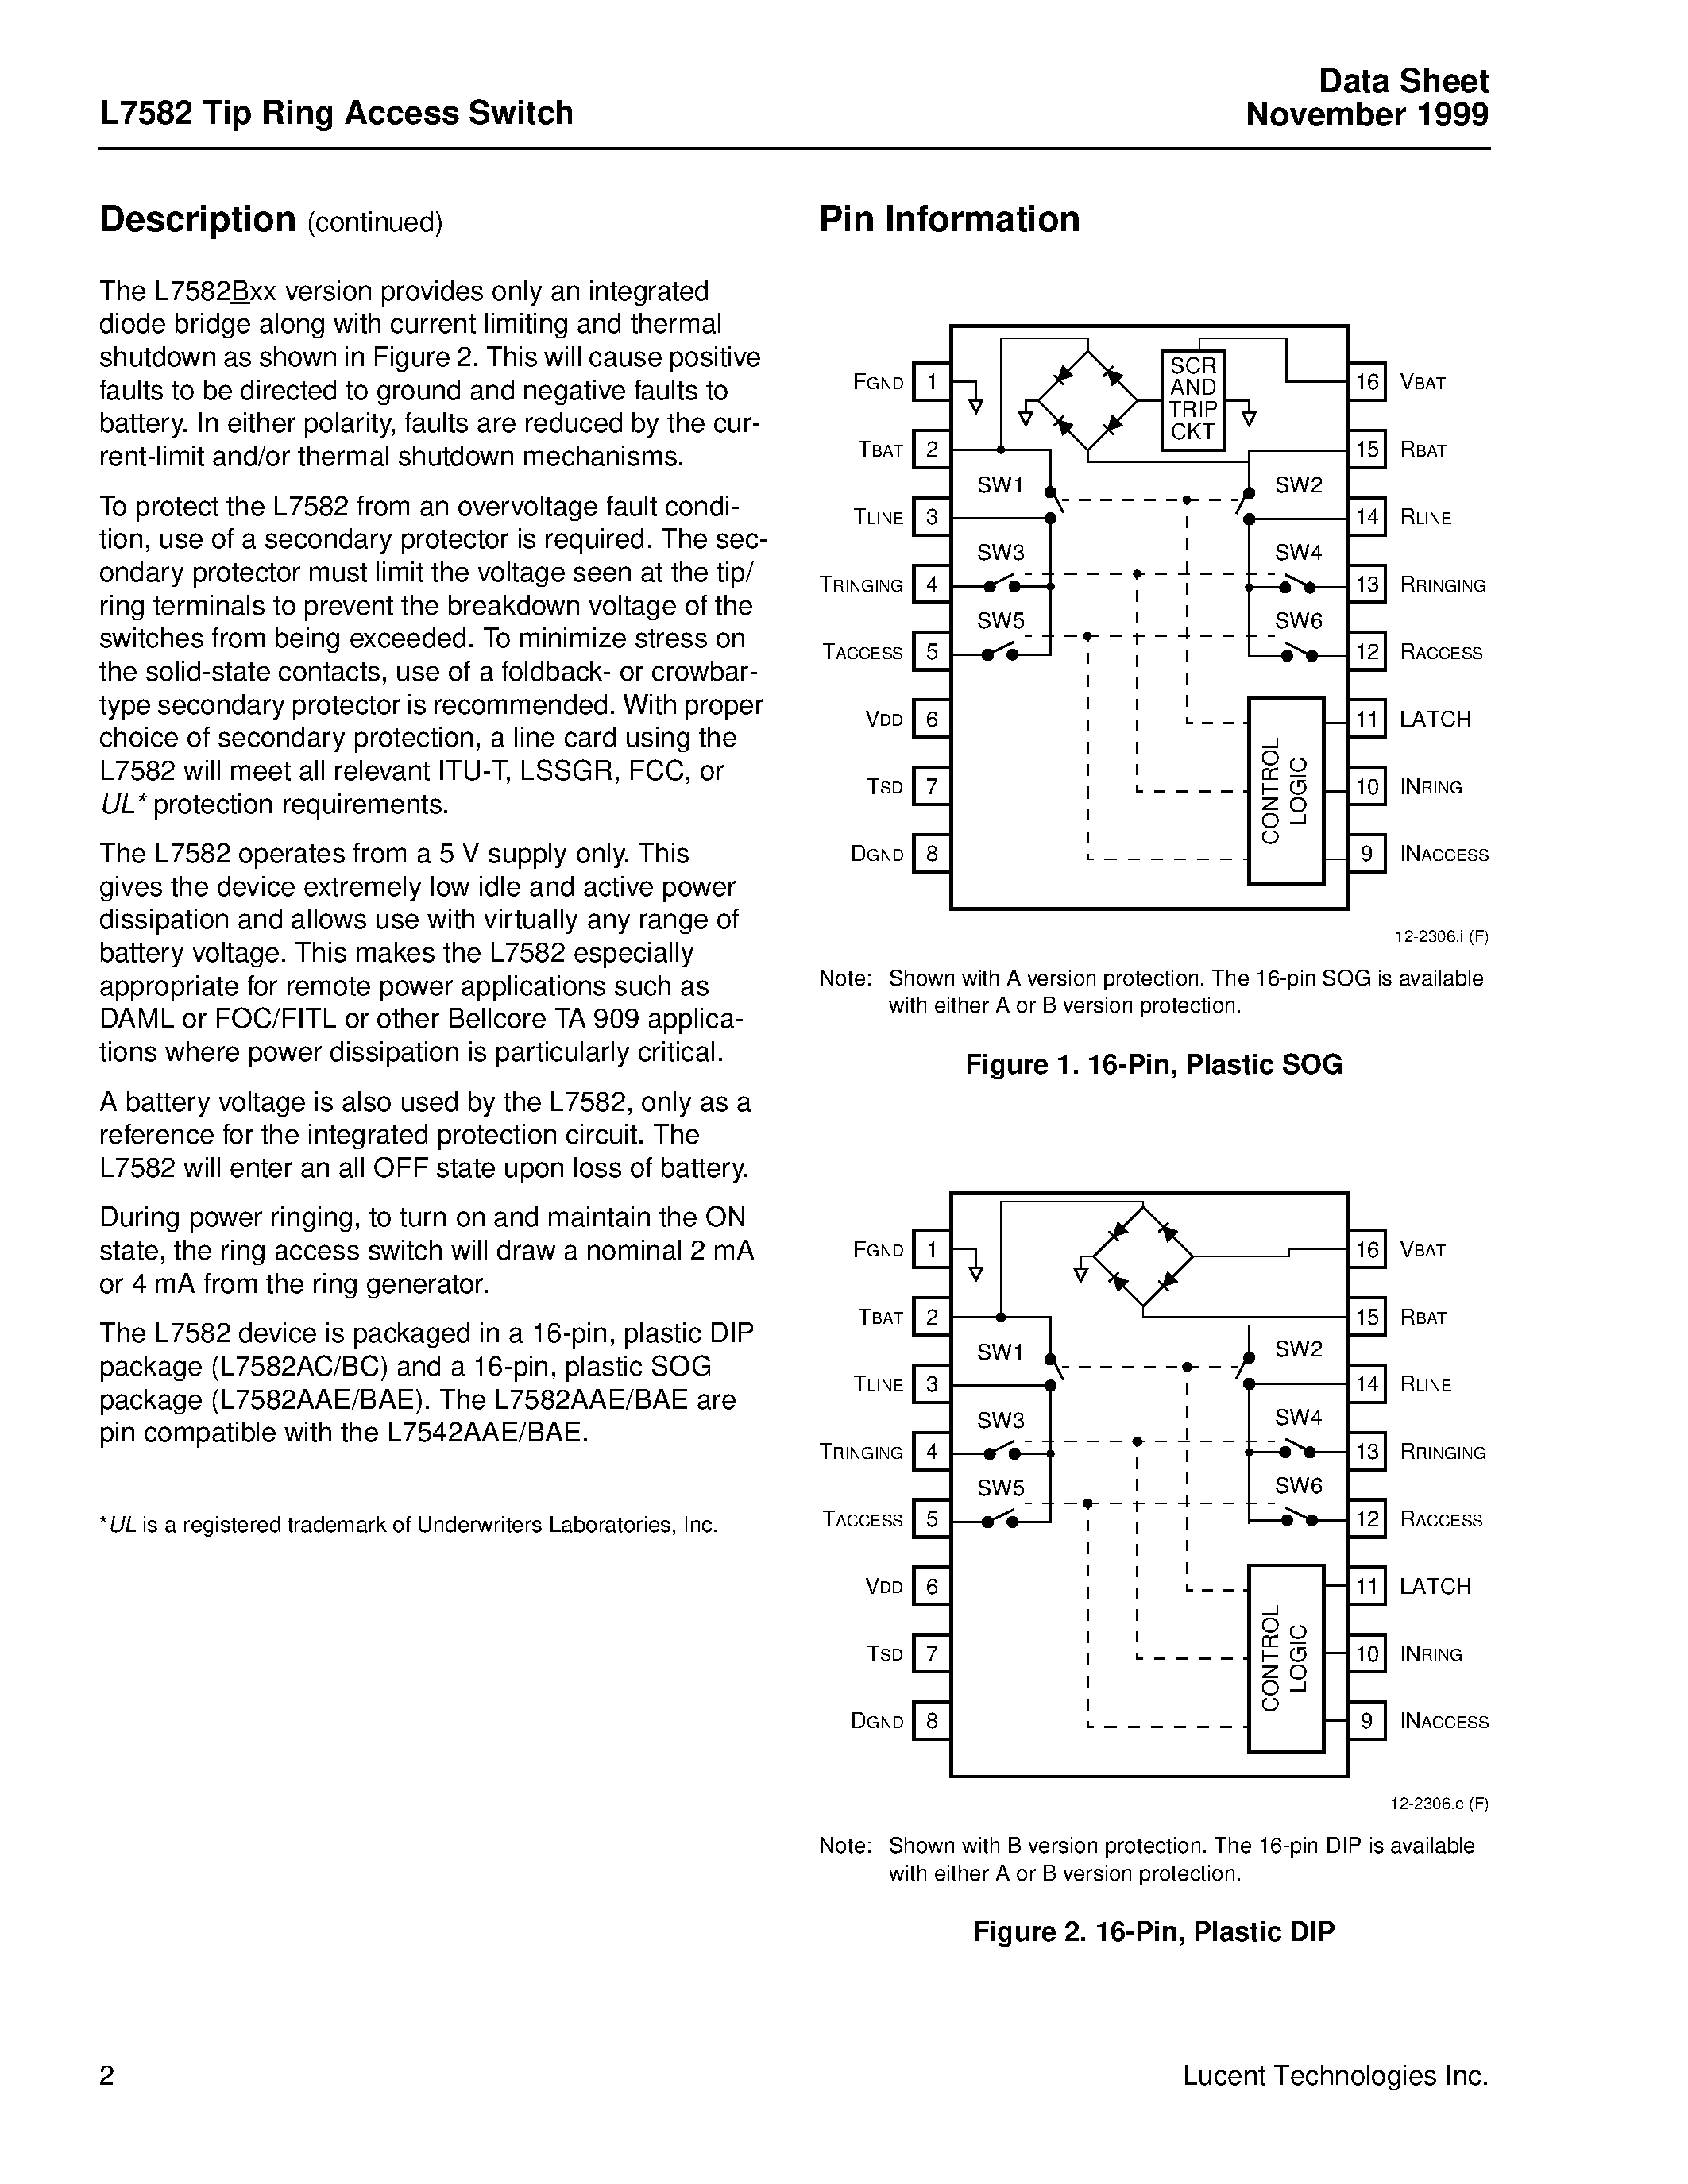 Datasheet ATTL7582BAE - Tip Ring Access Switch page 2